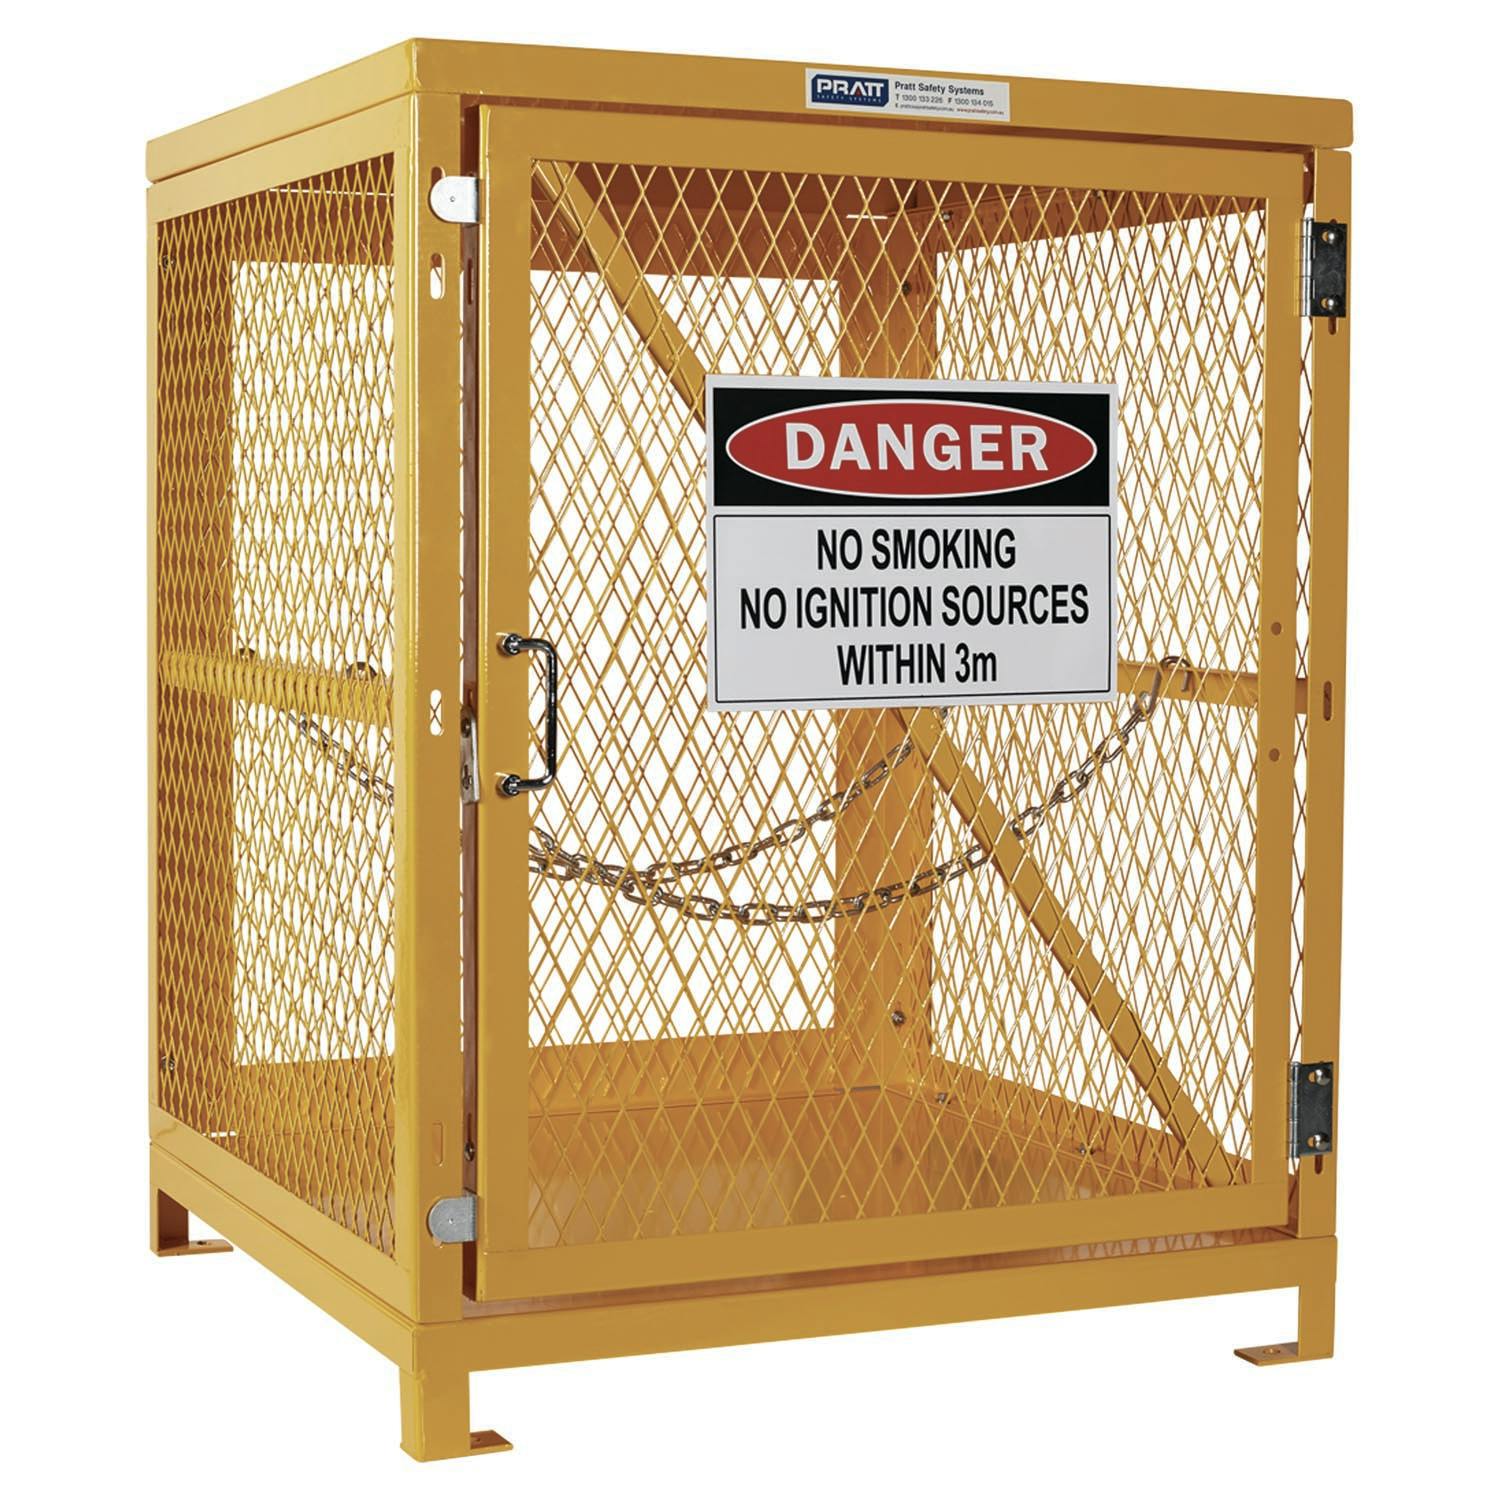 Pratt Forklift Storage Cage. 1 Storage Level Up To 4 Forklift Cylinders. (Comes Flat Packed - Assembly Required)